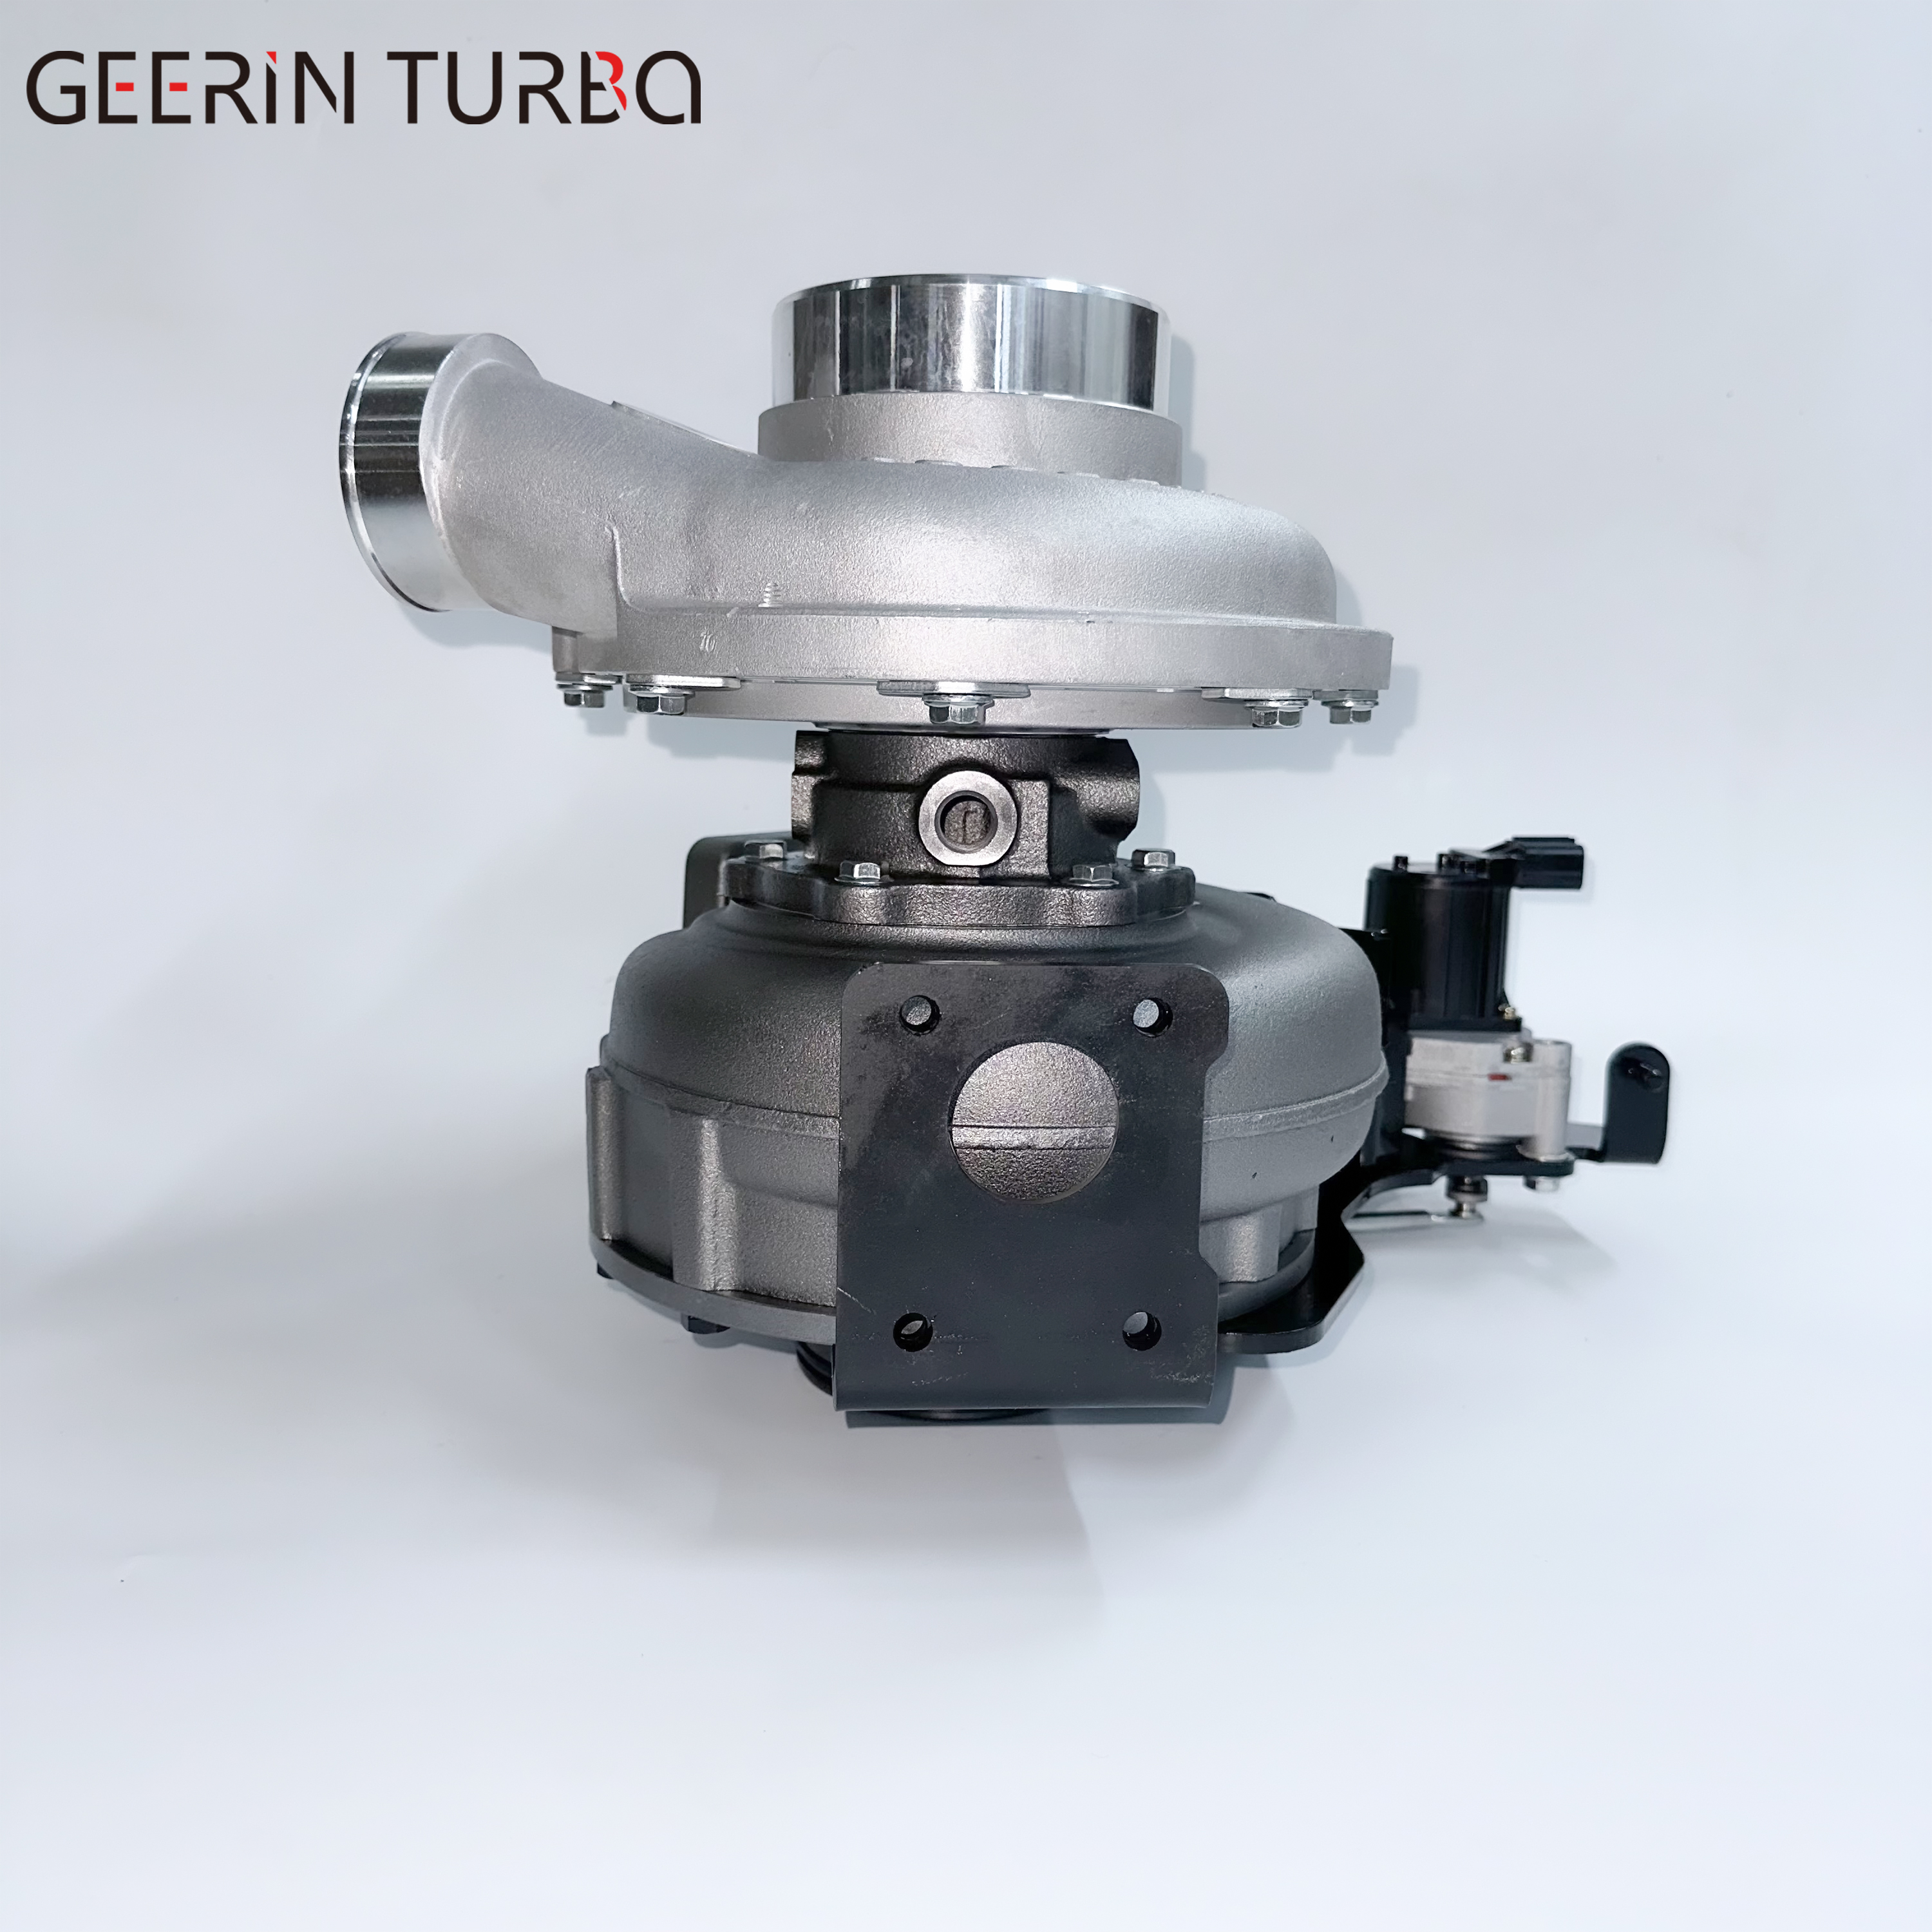 RHG8V S1760-E0022 S1760-E0M00 S1760-E0M40 E1760-E0021 S1760-E0020 Full Turbocharger For HINO Factory